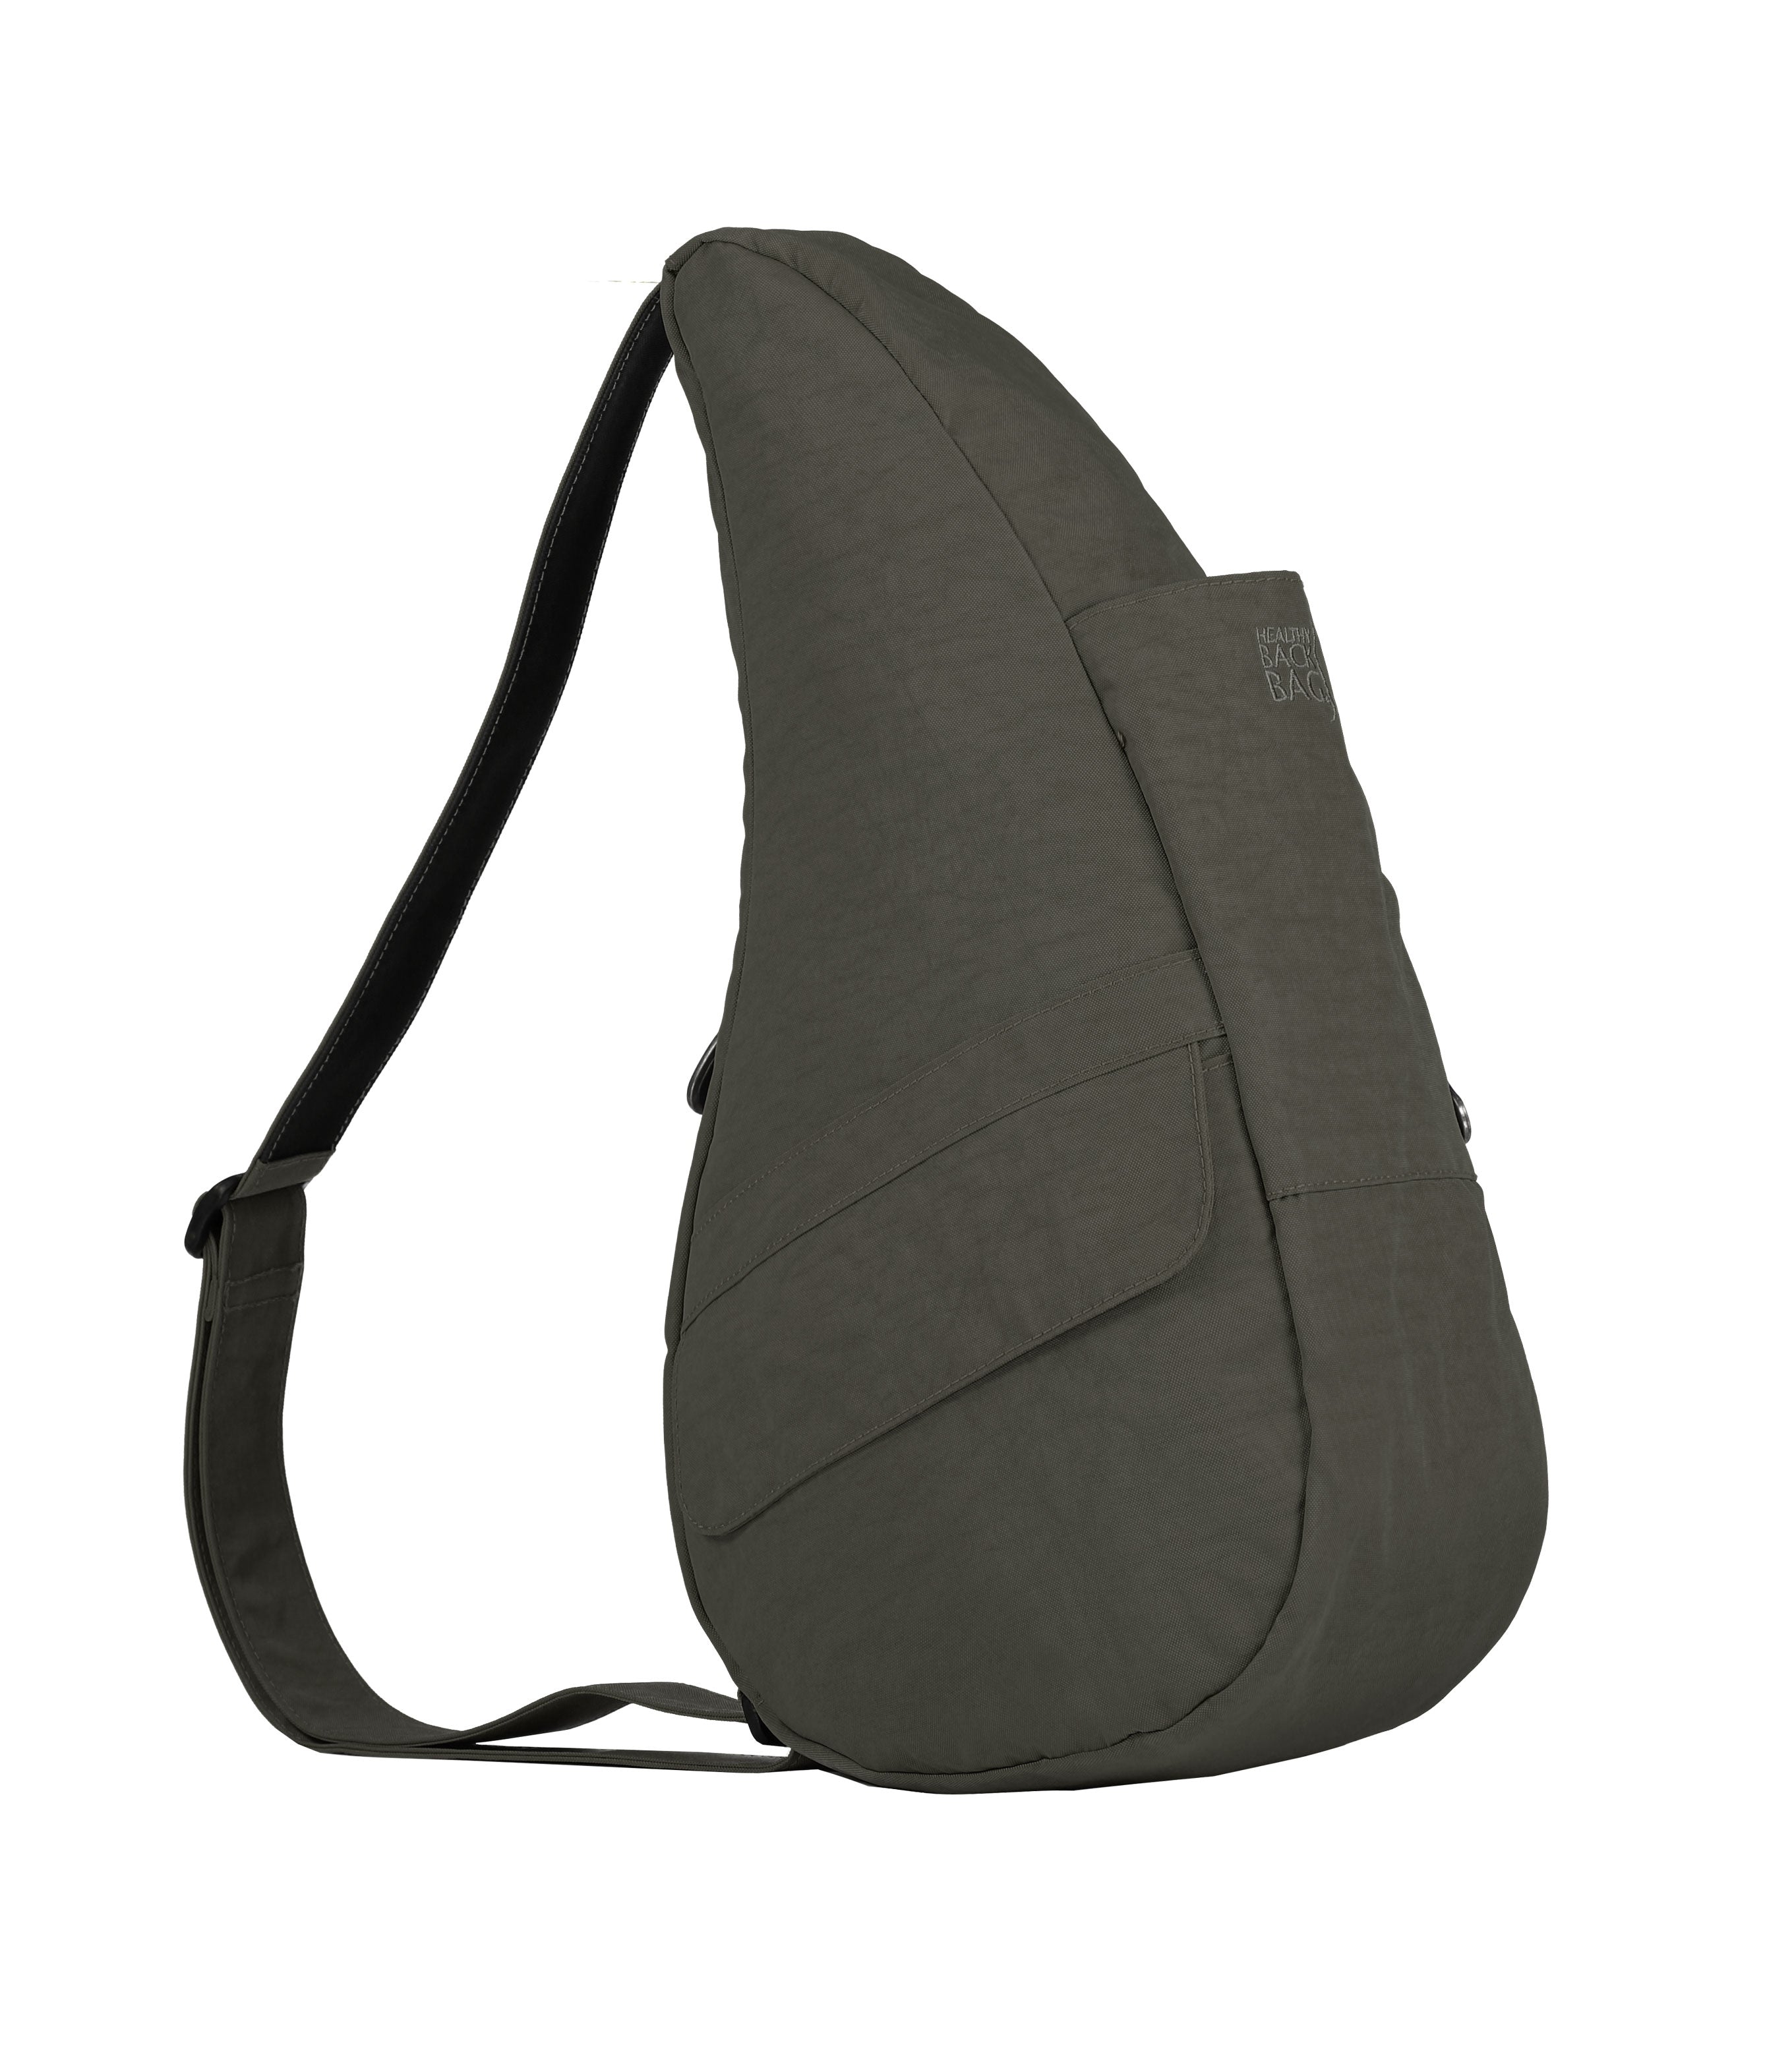 Healthy Back Bags - Back in Action